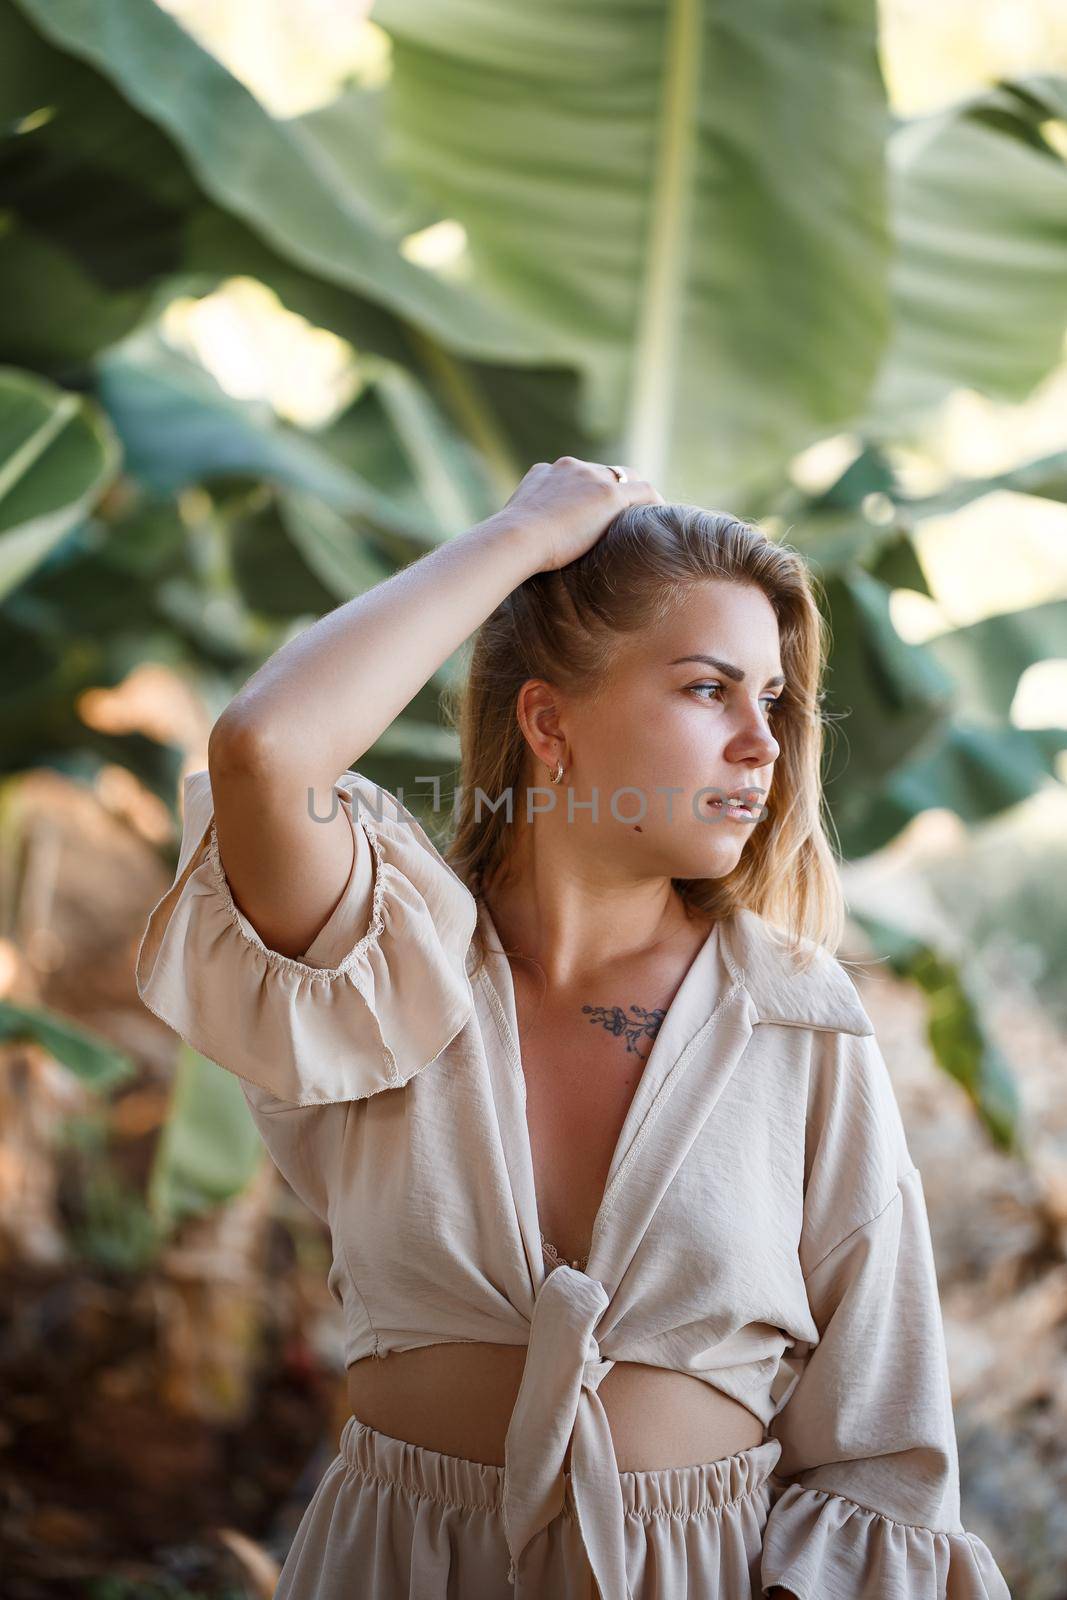 A woman stands near green banana leaves on the island. Tropical trees